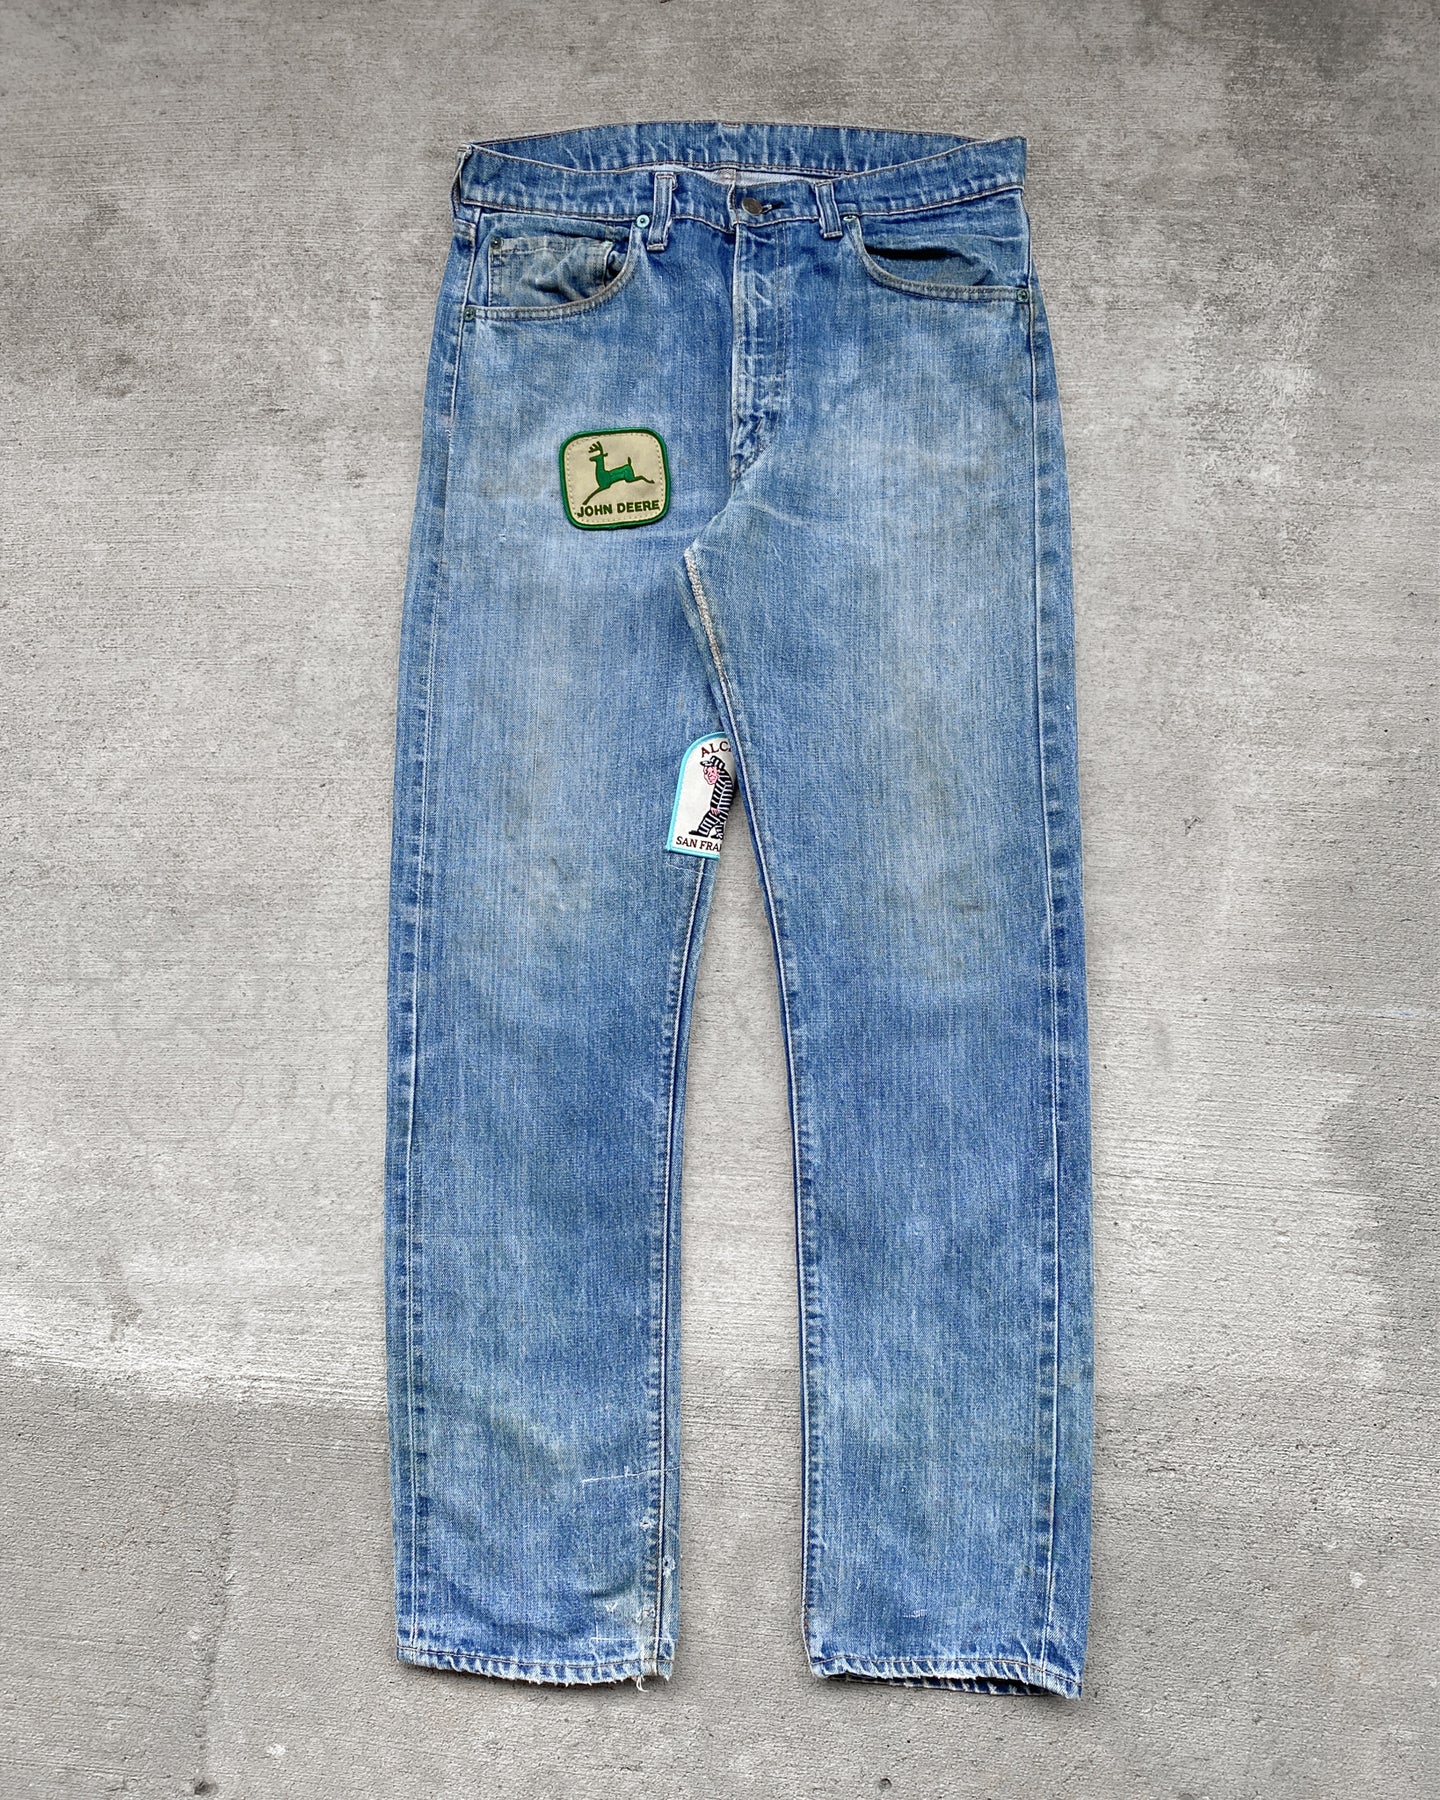 1970s Levi's Patched and Repaired Selvedge 505 - Size 34 x 32